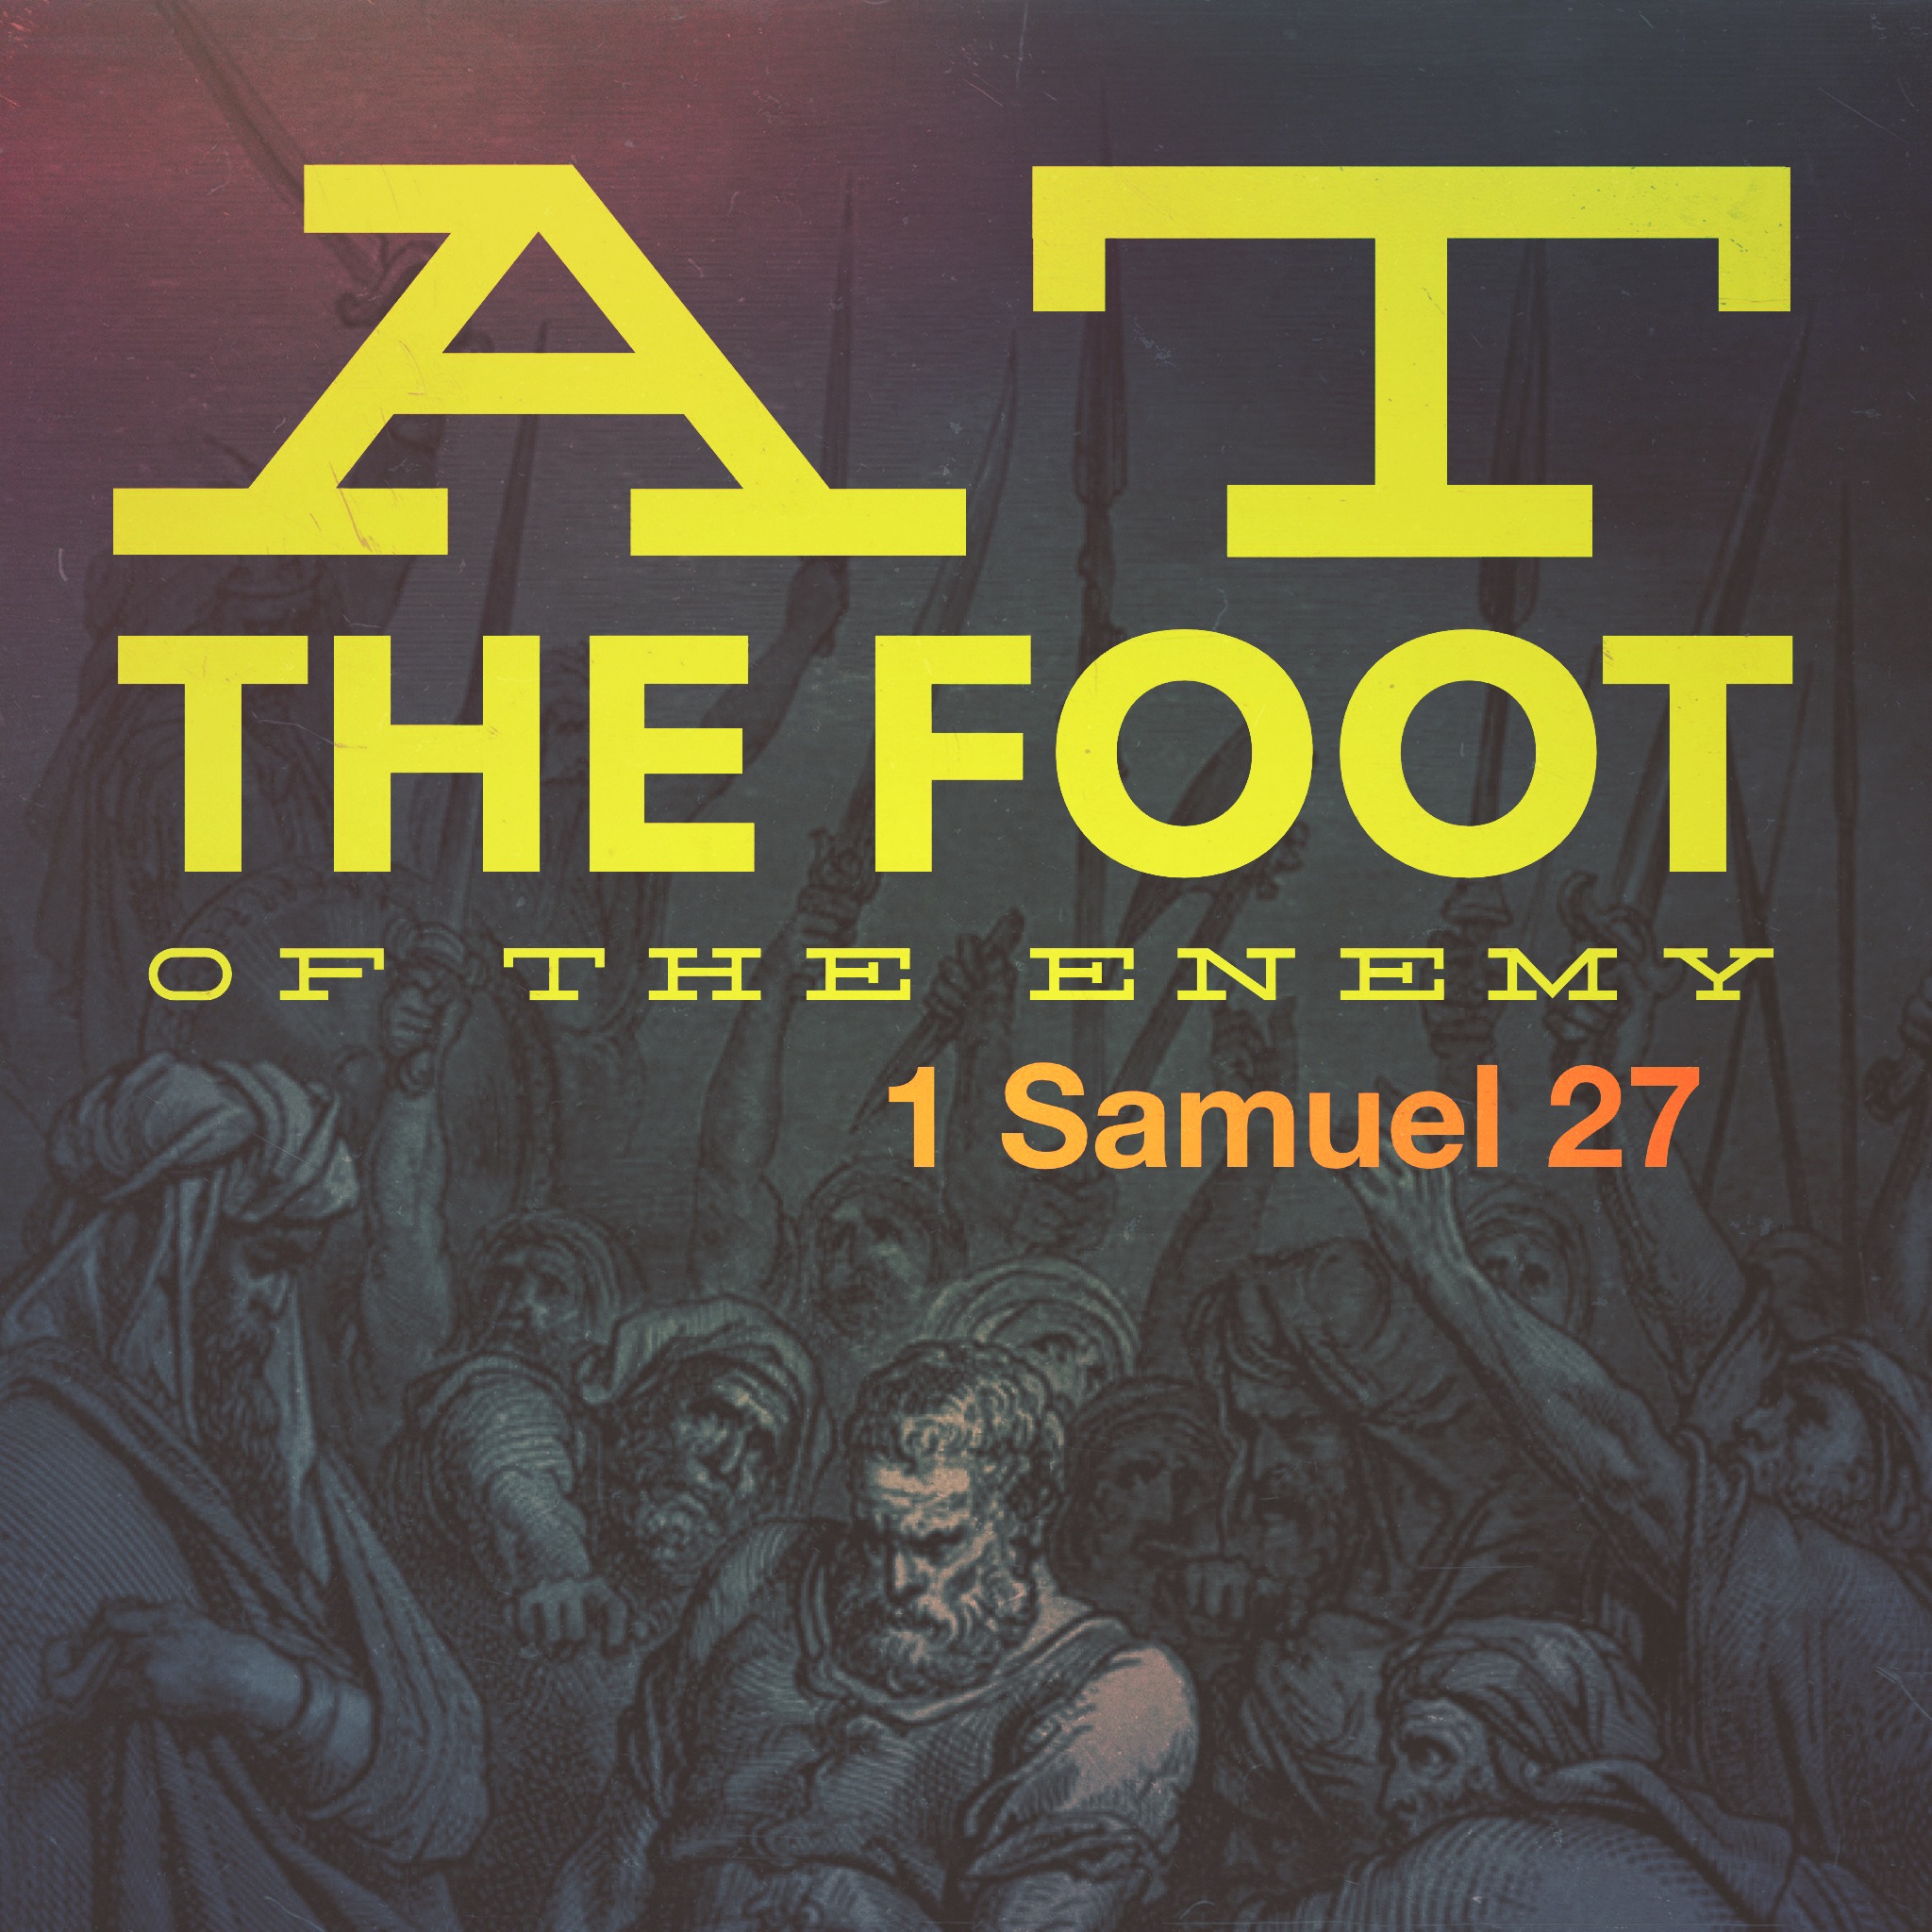 1 Samuel 27: At the Foot of the Enemy